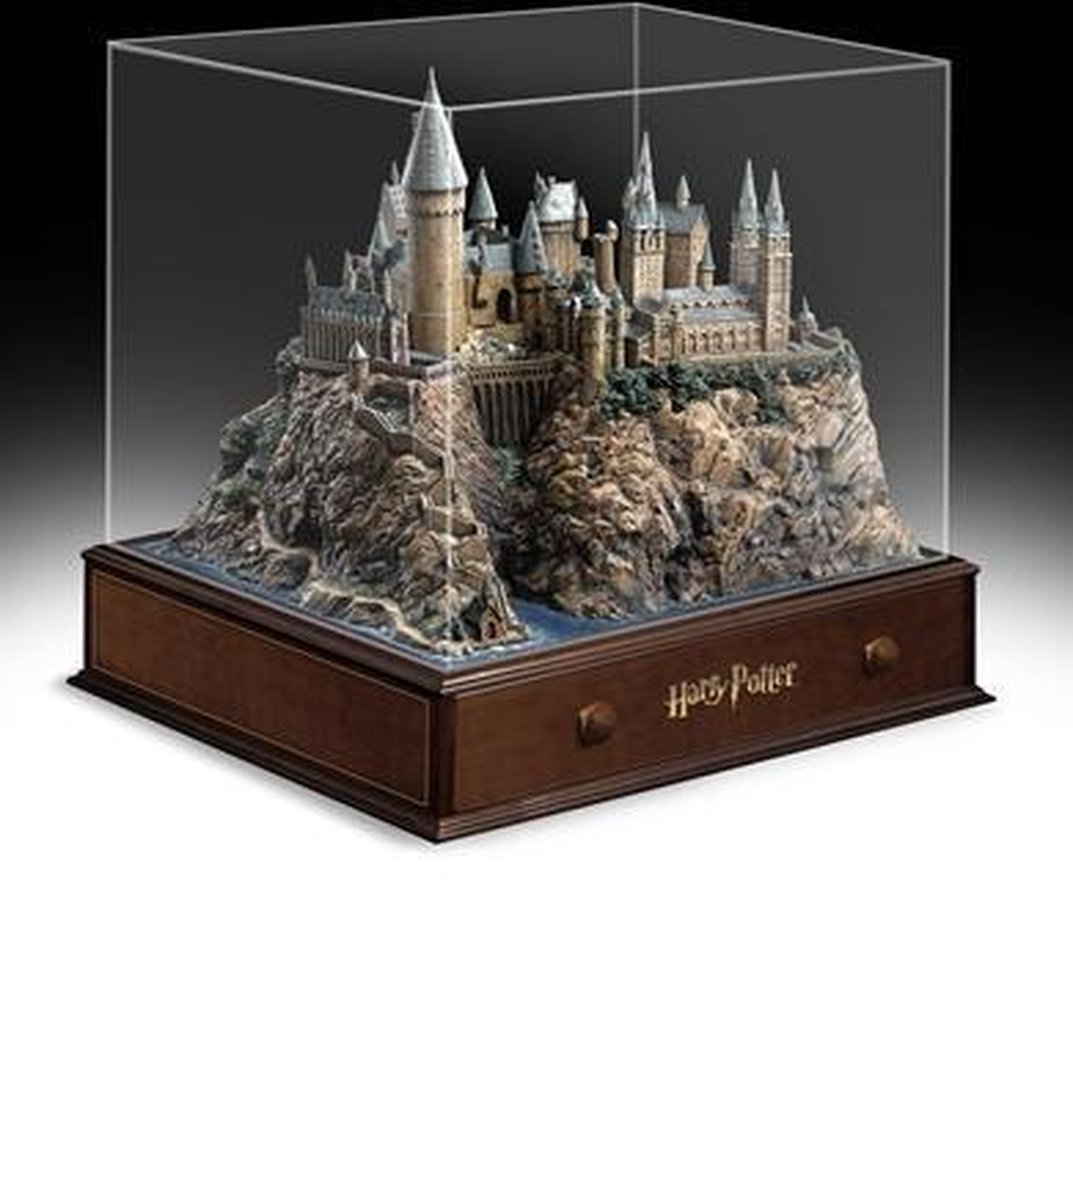 Harry Potter Collectie 1 t/m 6 + Hogwarts Castle (Collector's Edition)  (Blu-ray),... | bol.com